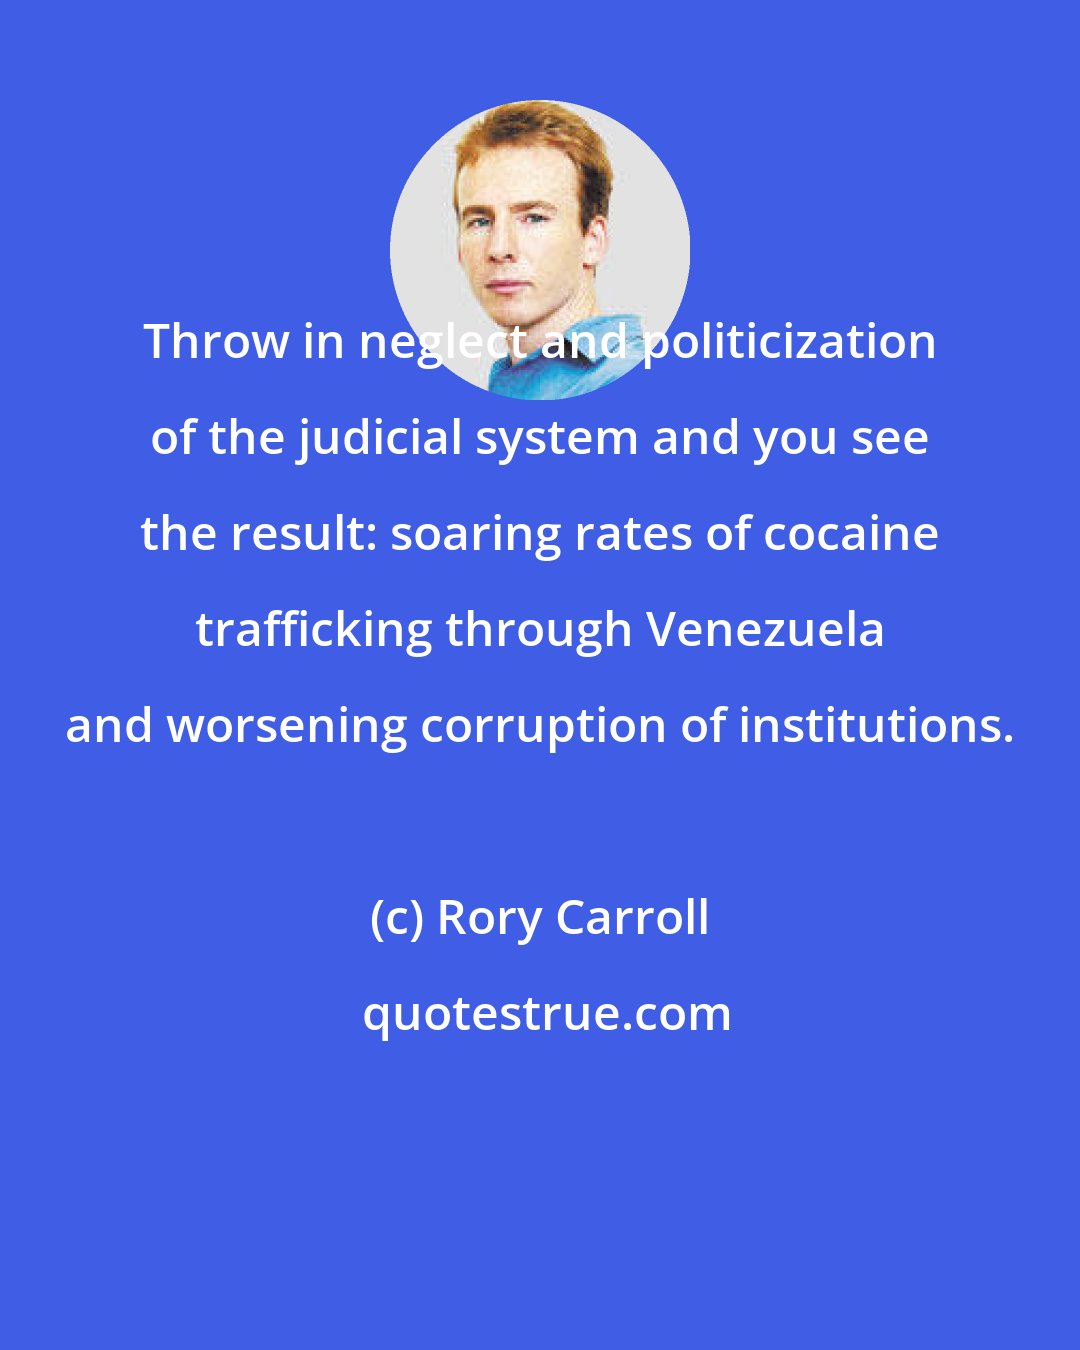 Rory Carroll: Throw in neglect and politicization of the judicial system and you see the result: soaring rates of cocaine trafficking through Venezuela and worsening corruption of institutions.